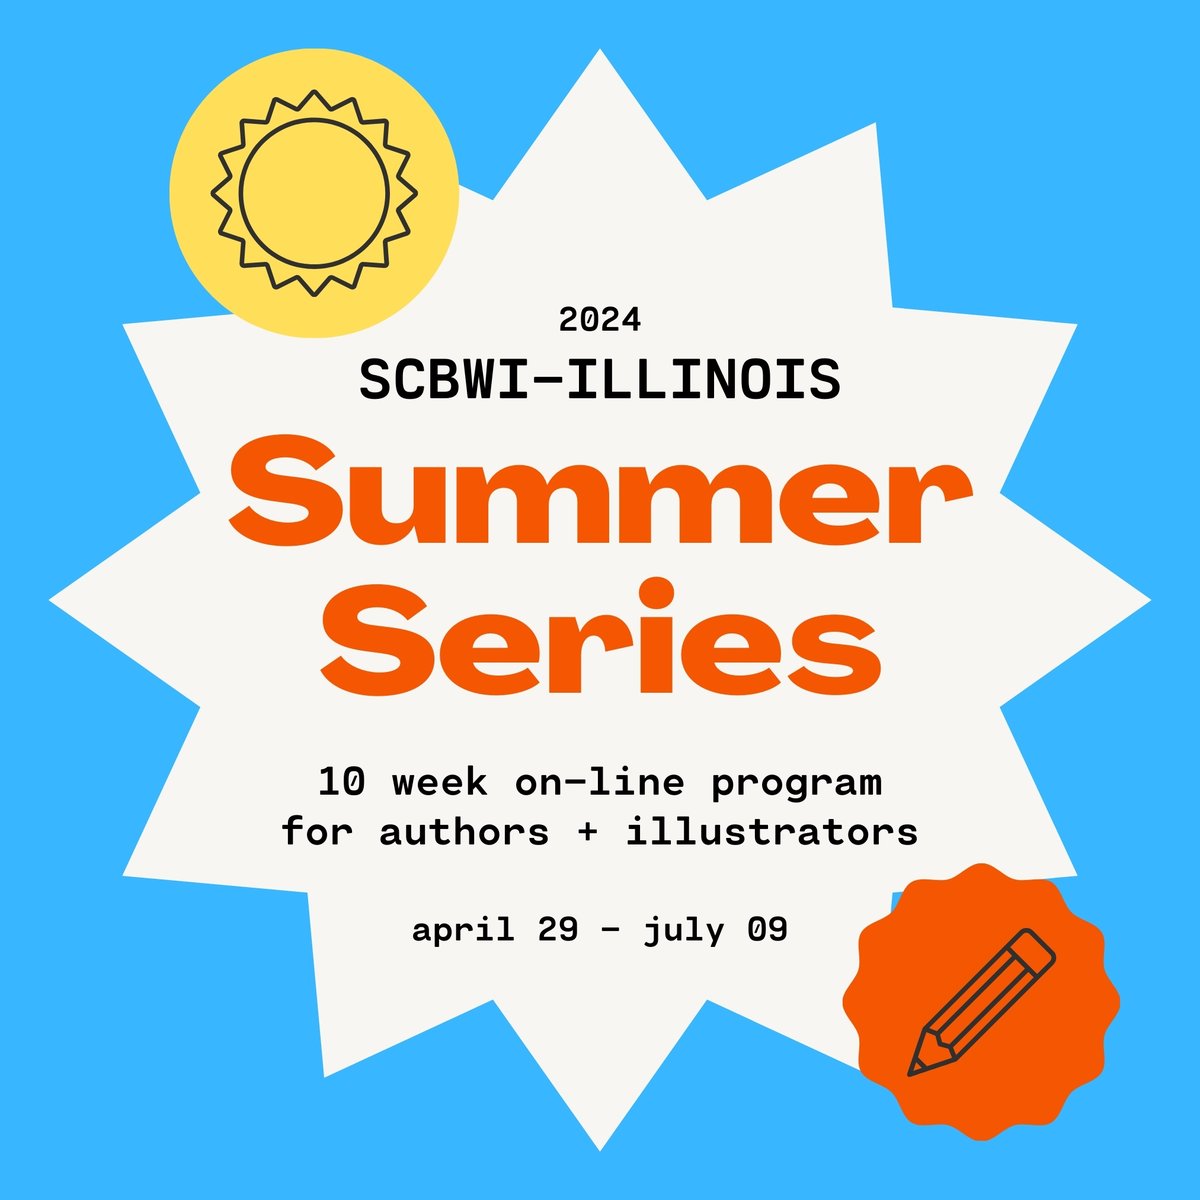 Calling all writers & illustrators! Join SCBWI-IL's Summer Series for 10 weeks of online programs led by industry pros. Get critiques, ask questions, and level up your work! Register by May 24. Limited spots available. Link in Bio! #SCBWIILLINOIS #writers #illustrators #SCBWI